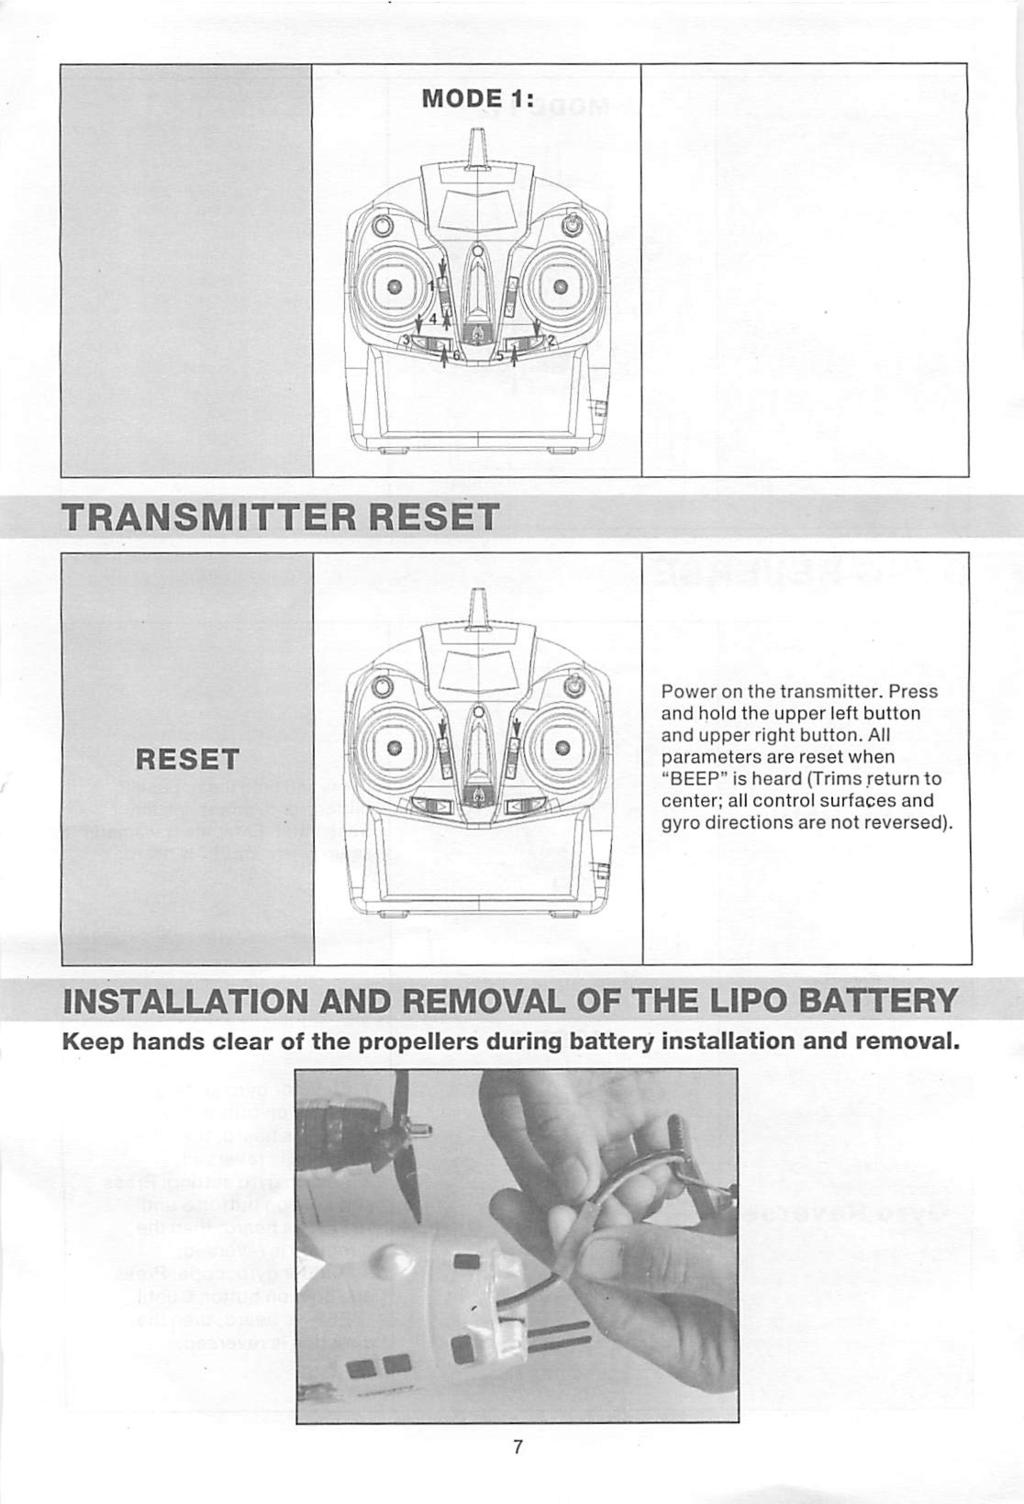 TRANSMITTER RESET Power on the transmitter. Press and hold the upper left button and upper right button.